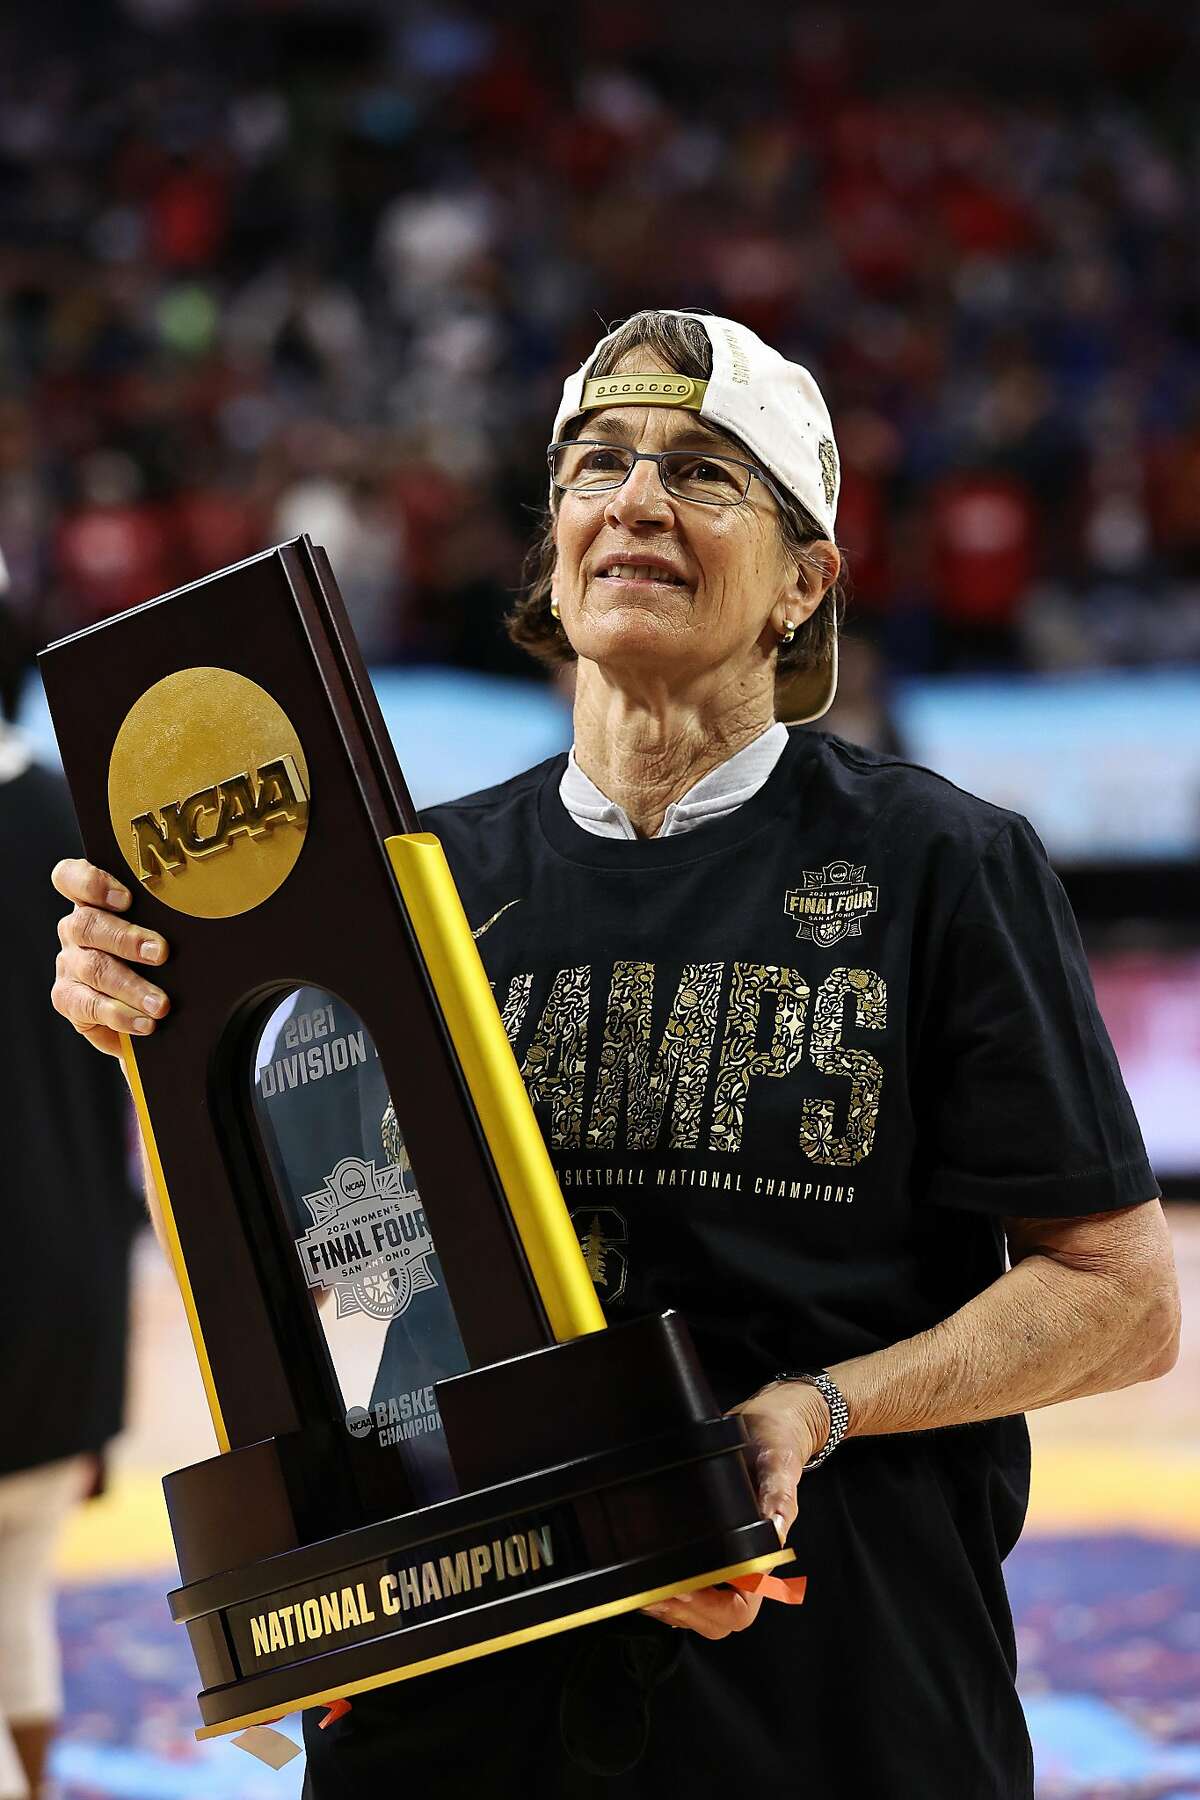 SAN ANTONIO, TEXAS - APRIL 04: Head coach Tara VanDerveer of the Stanford Cardinals celebrates with the trophy after the team's win against the Arizona Wildcats in the National Championship game of the 2021 NCAA Women's Basketball Tournament at the Alamodome on April 04, 2021 in San Antonio, Texas. (Photo by Elsa/Getty Images)